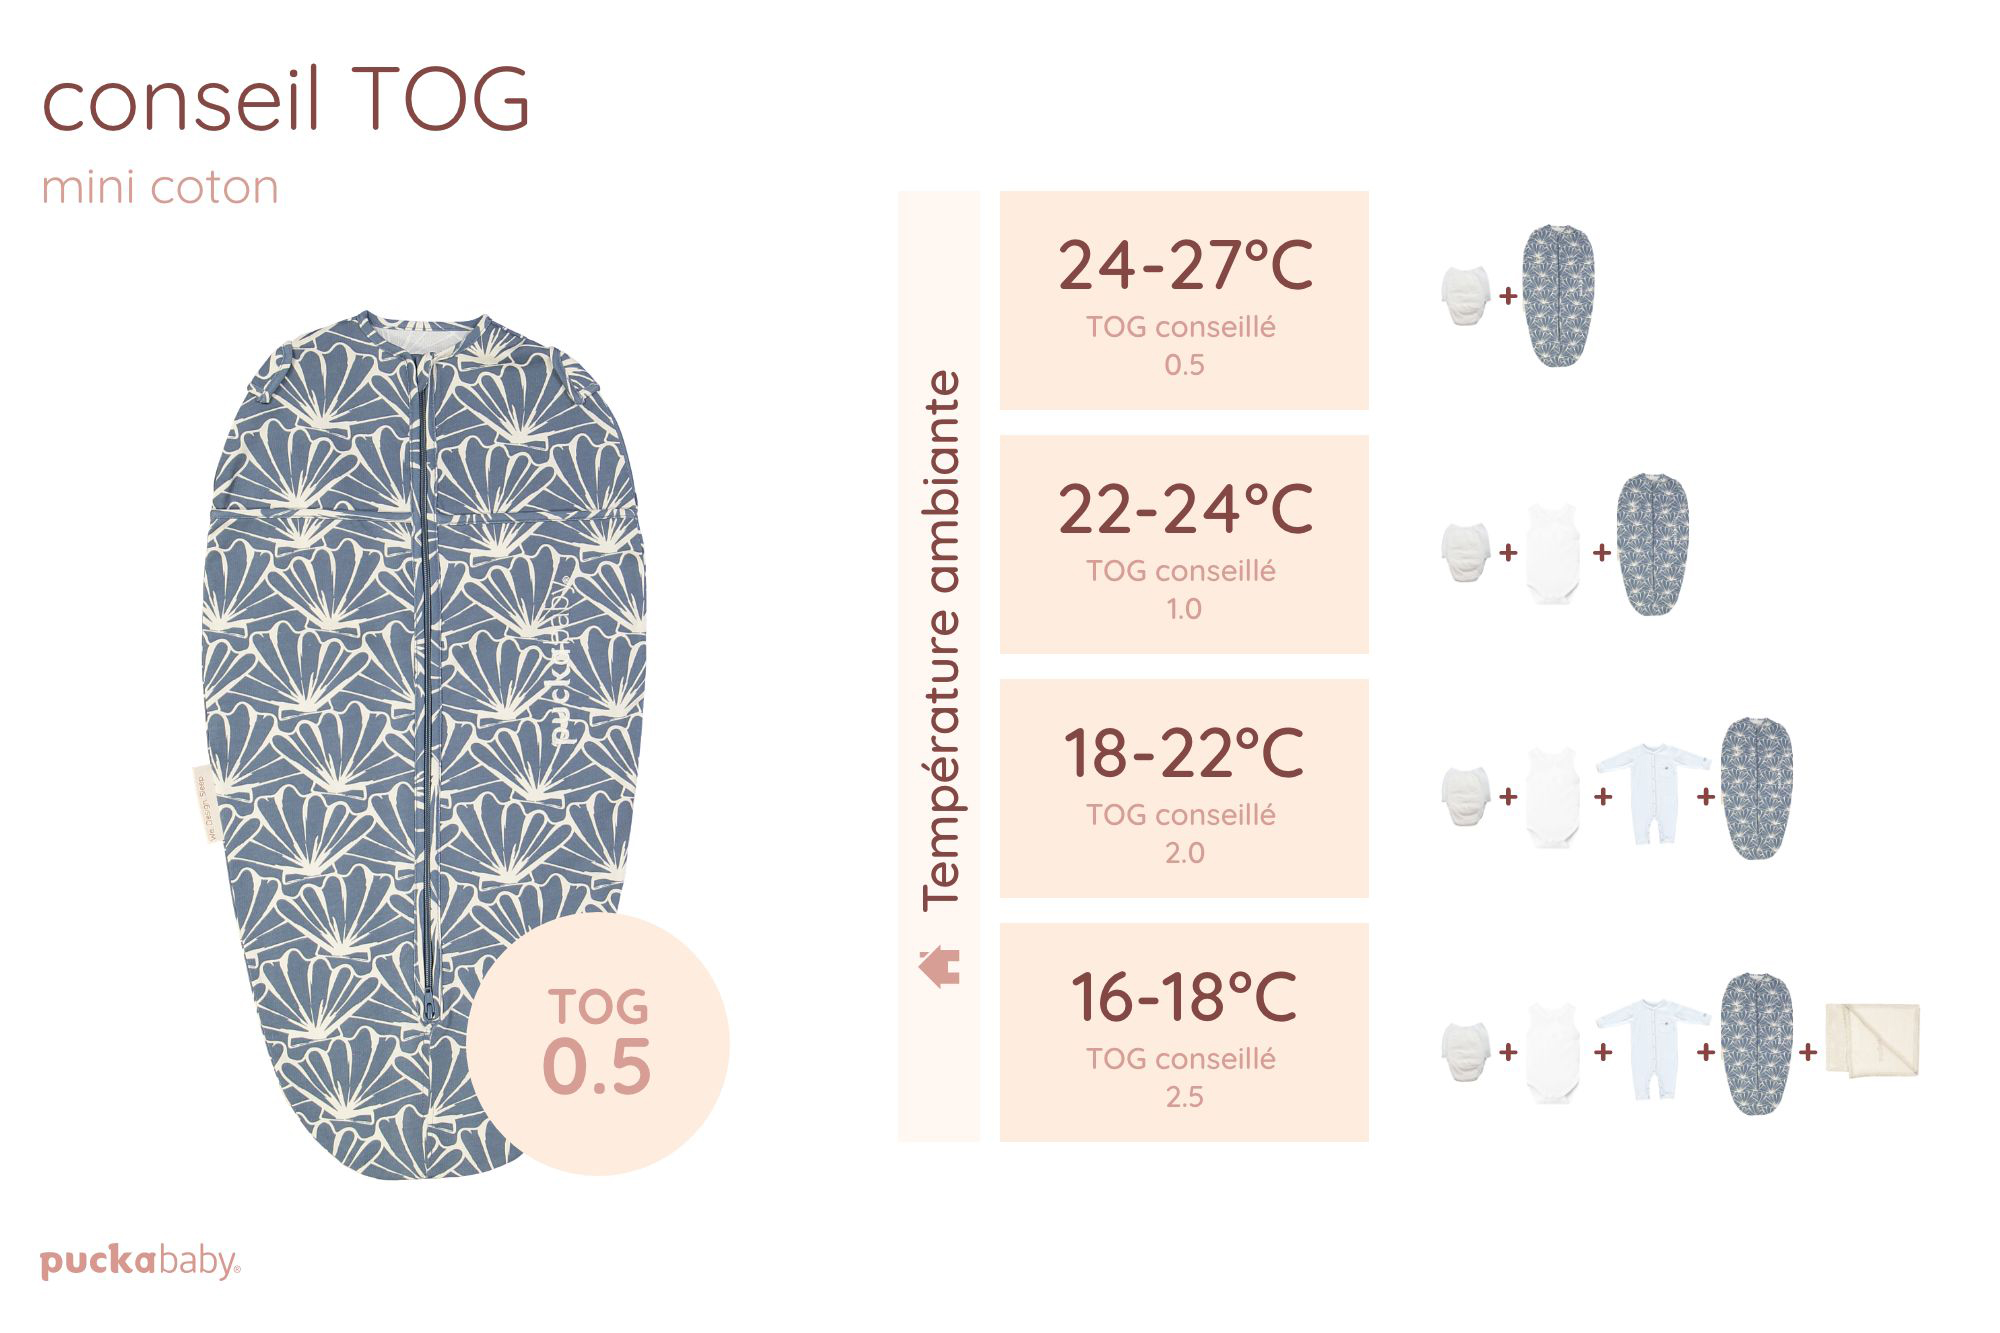  TOG values Mini Cotton swaddle bag | Puckababy